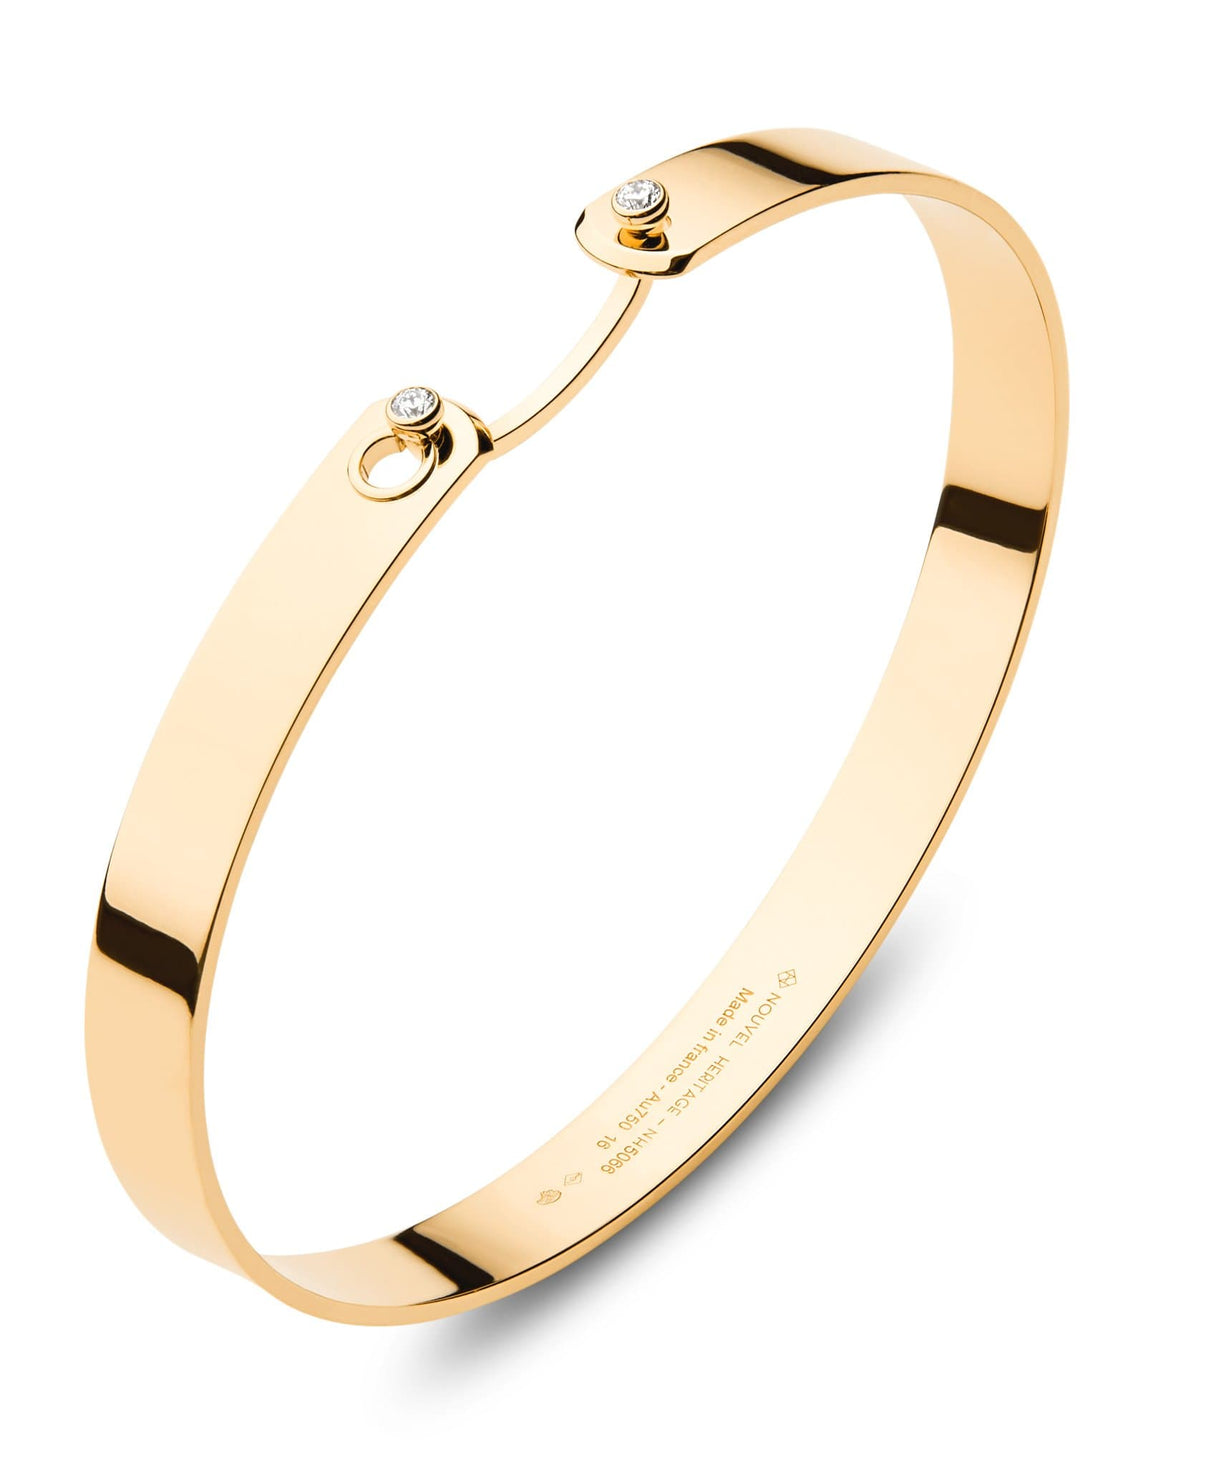 'Monday Morning" Bangle in Yellow Gold